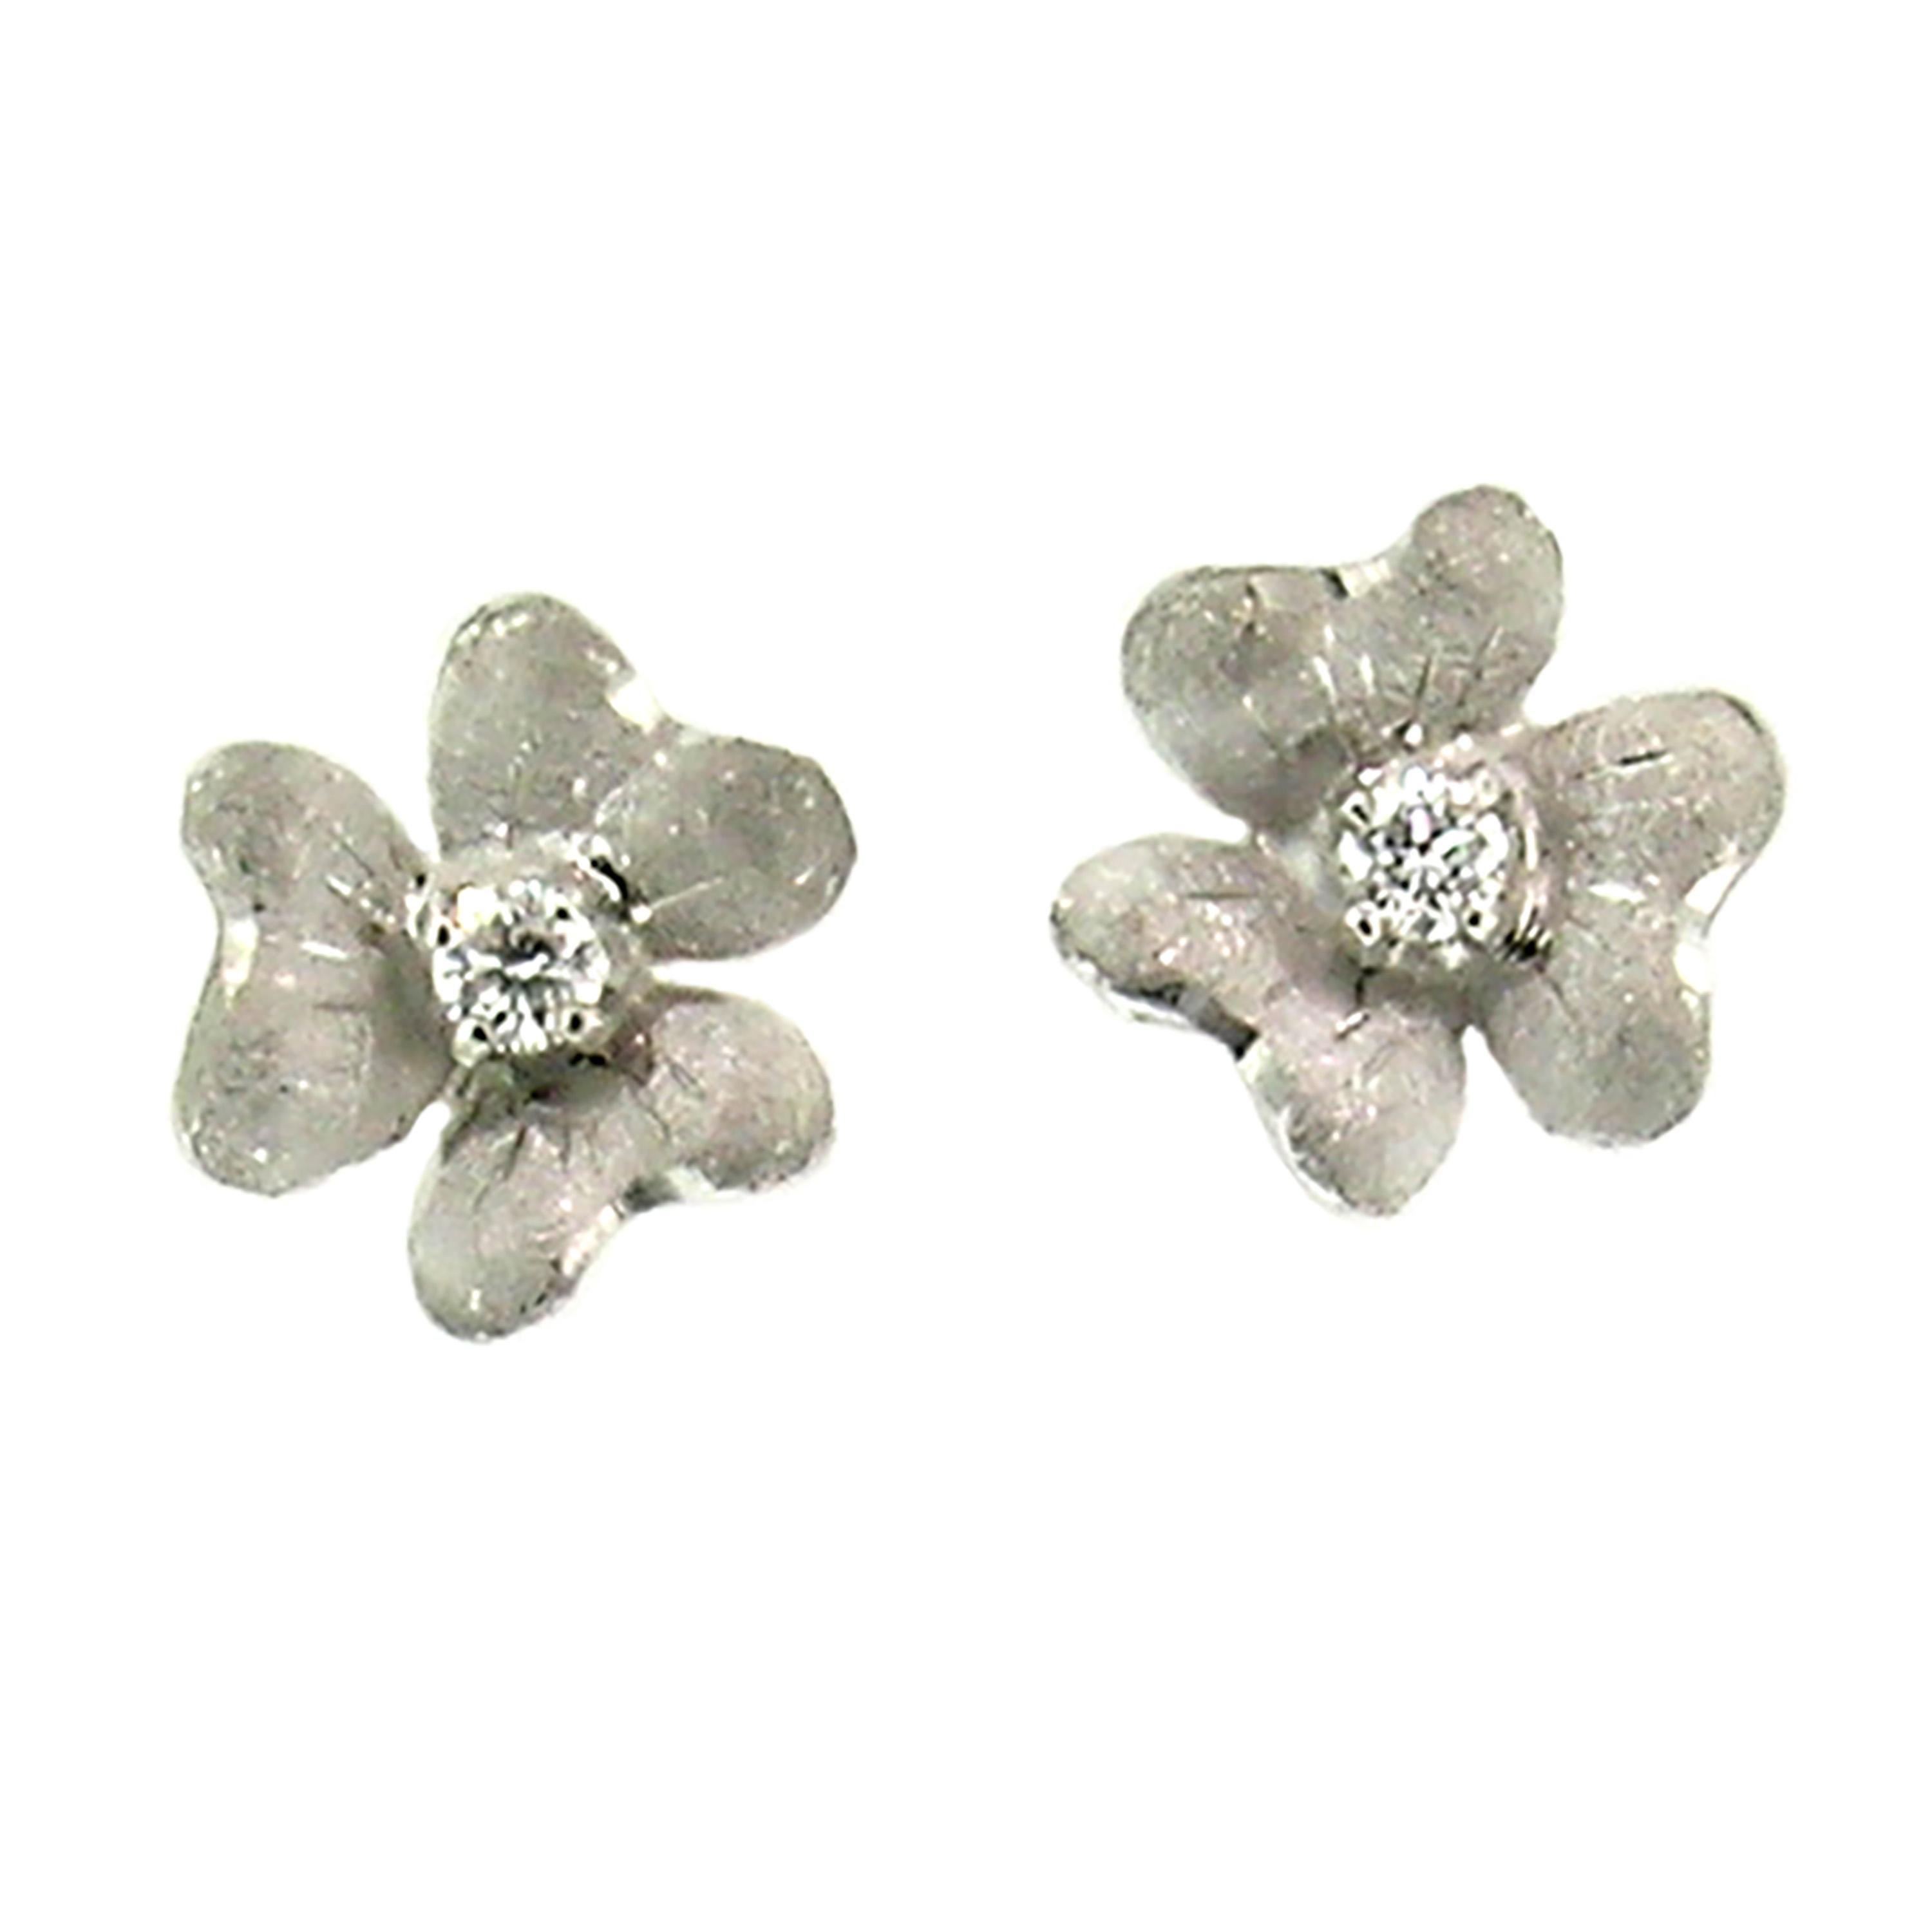 These dainty Floral earrings are finished with richly detailed Florentine engraving. They are a sculptured, three-dimensional shape that sits beautifully on the ear. Perfect for everyday wear, these earrings exude subtle elegance on their own or